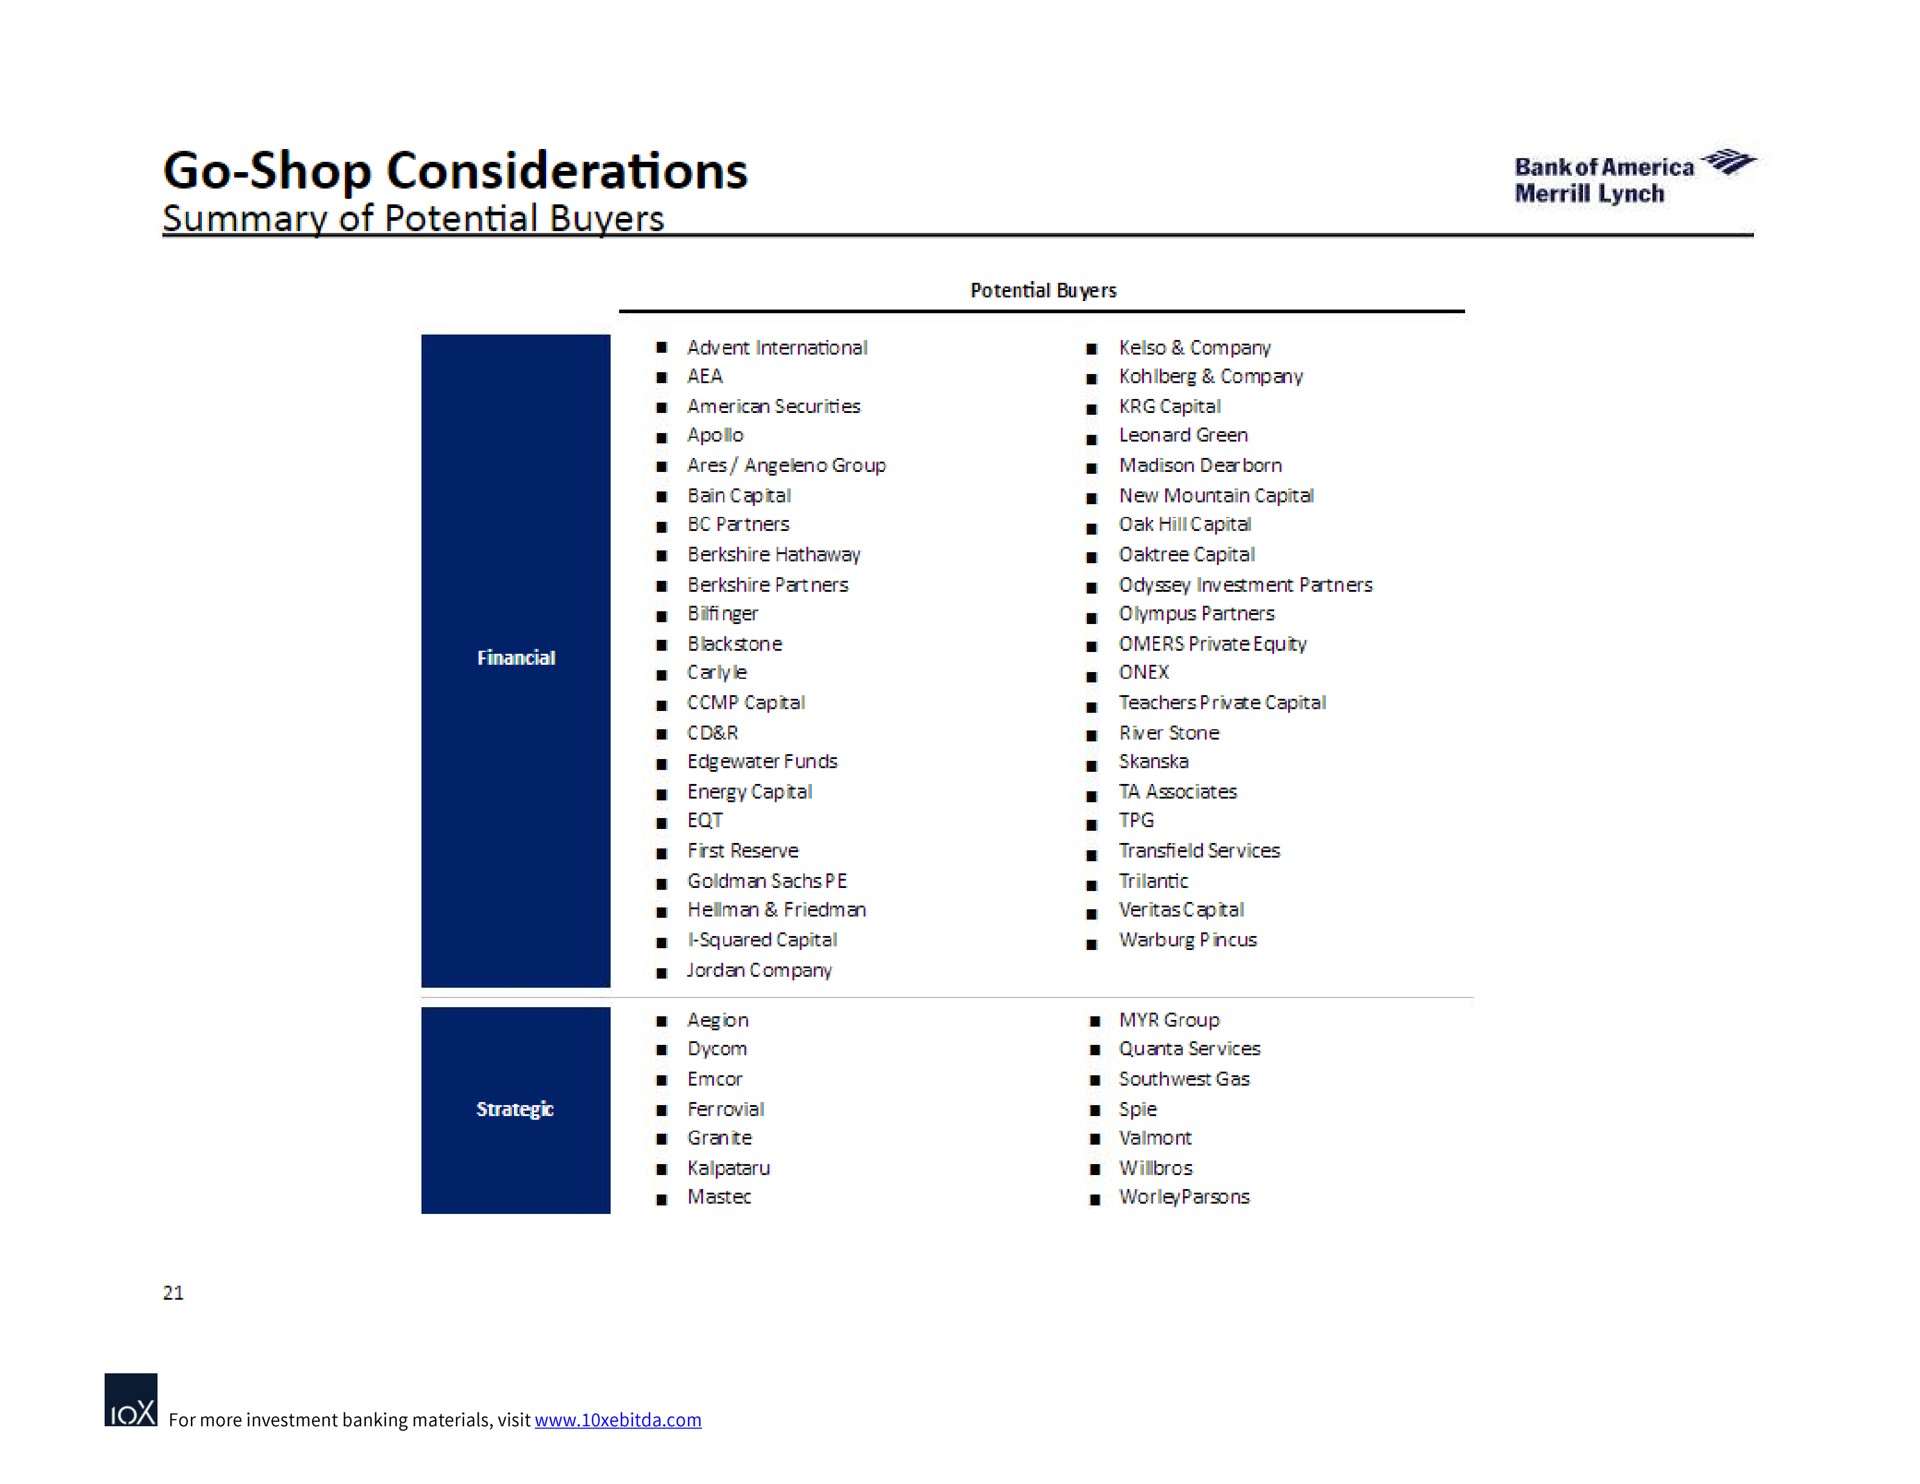 go shop considerations summary of potential buyers soot ness | Bank of America